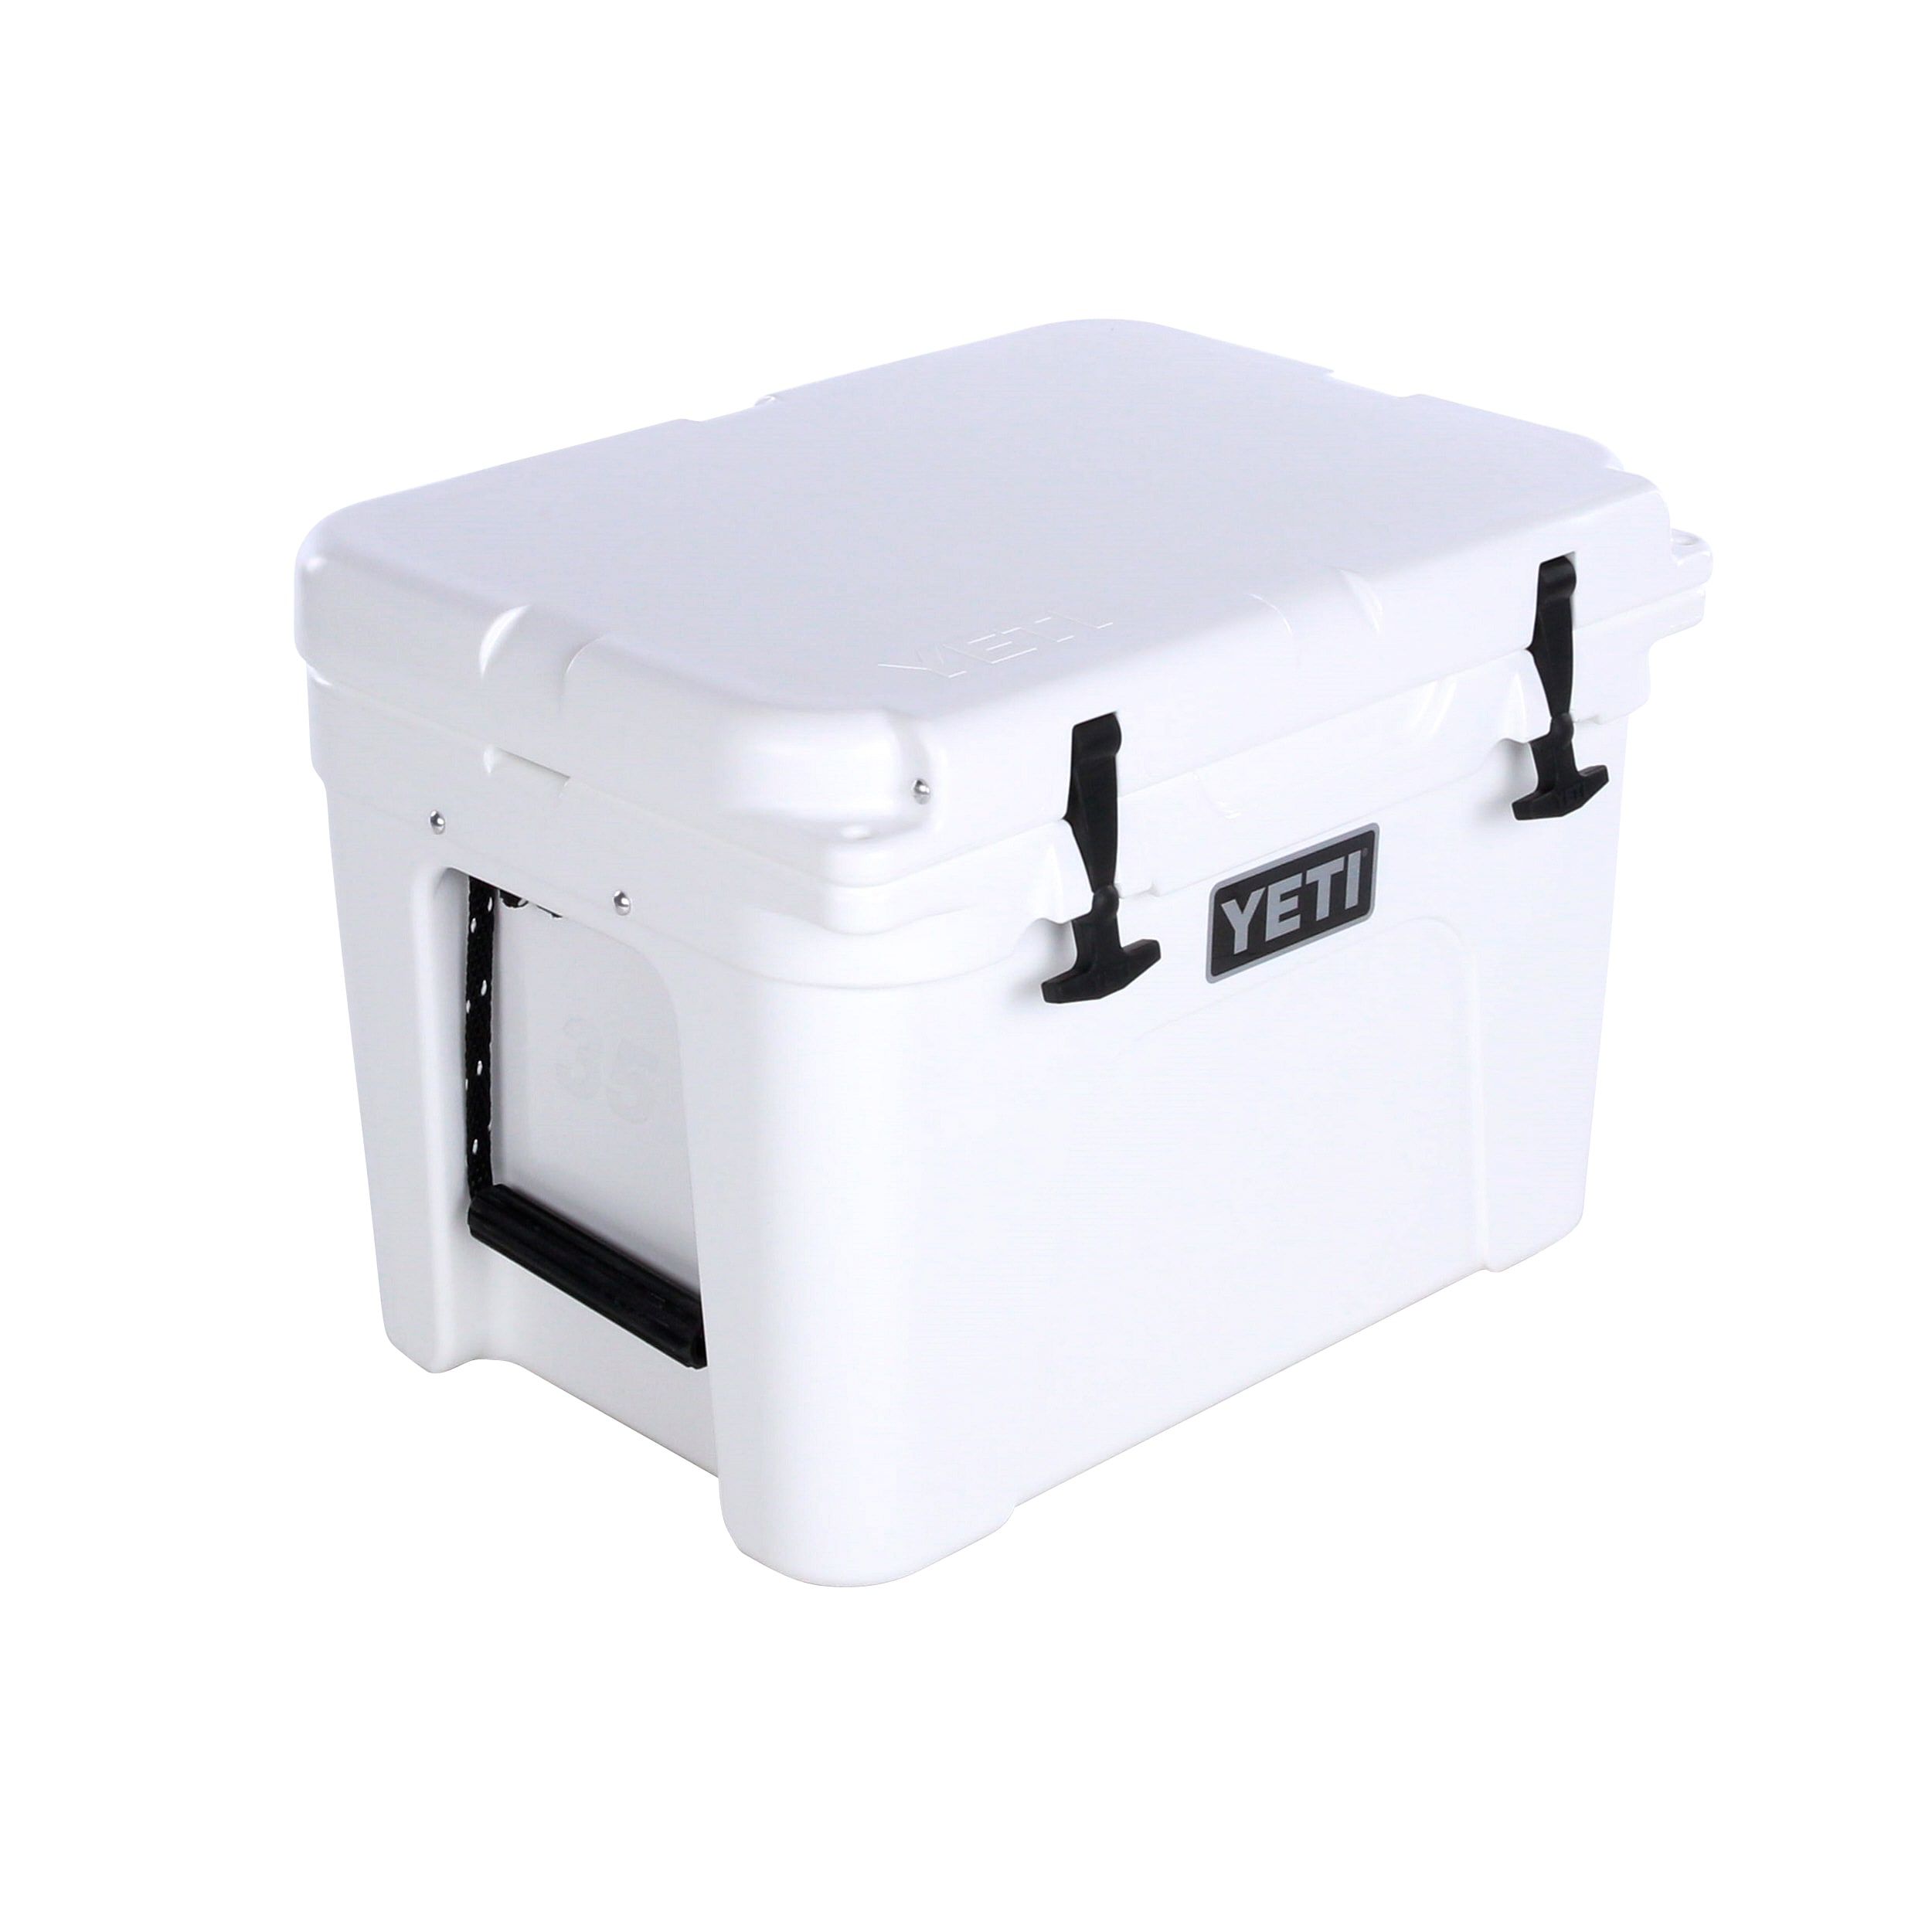 YETI Tundra 35 Insulated Chest Cooler, White at Lowes.com